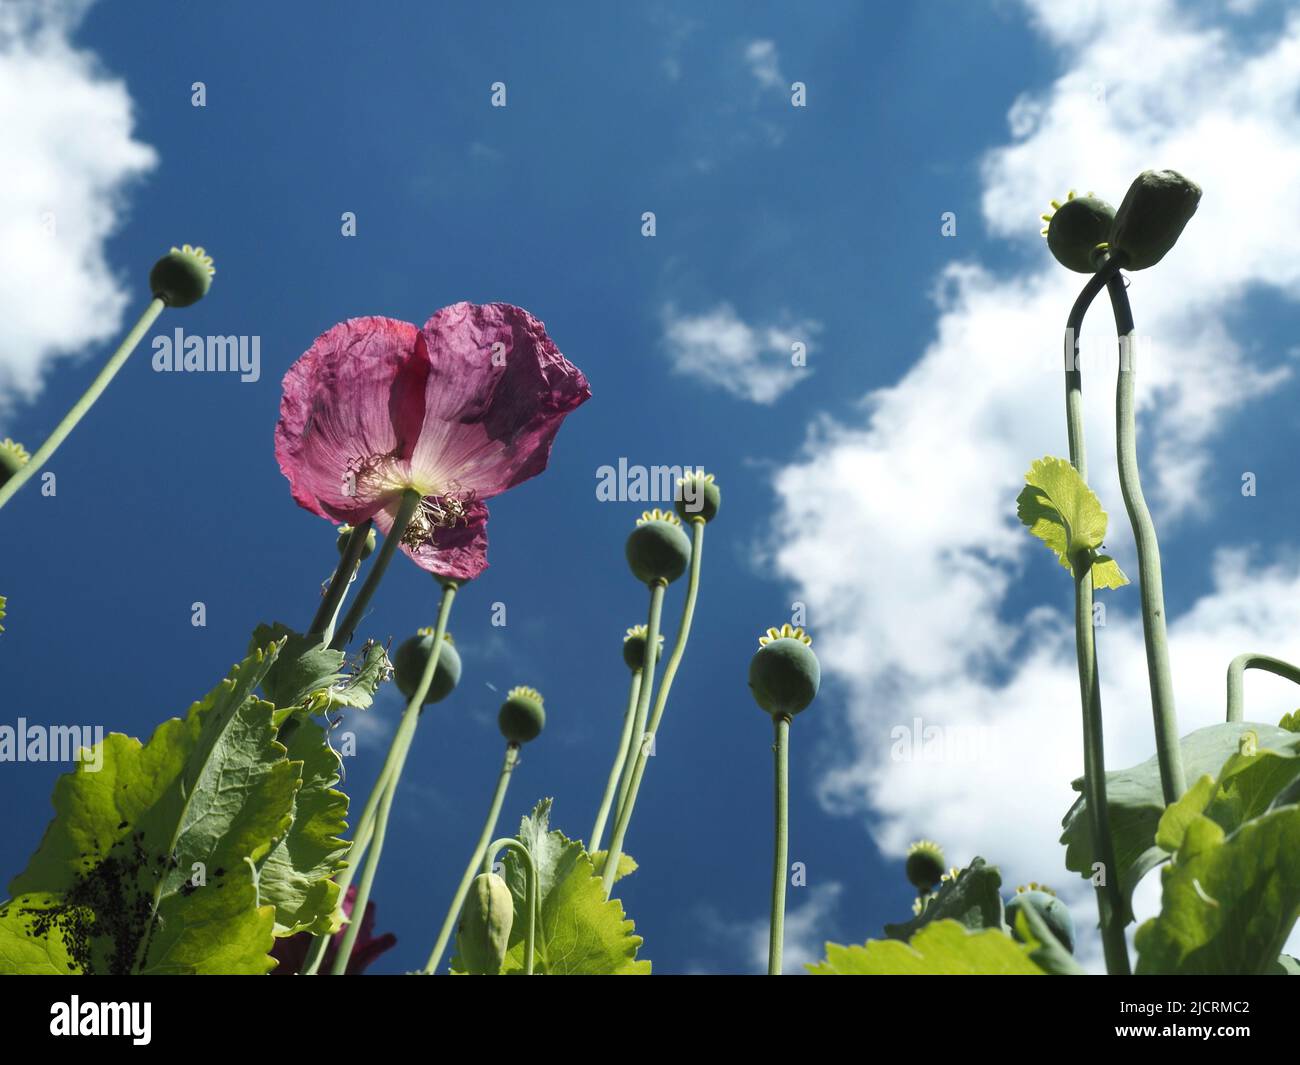 Plum coloured Oriental poppies (papaver) reach up towards a deep blue sky with light fluffy clouds. Stock Photo